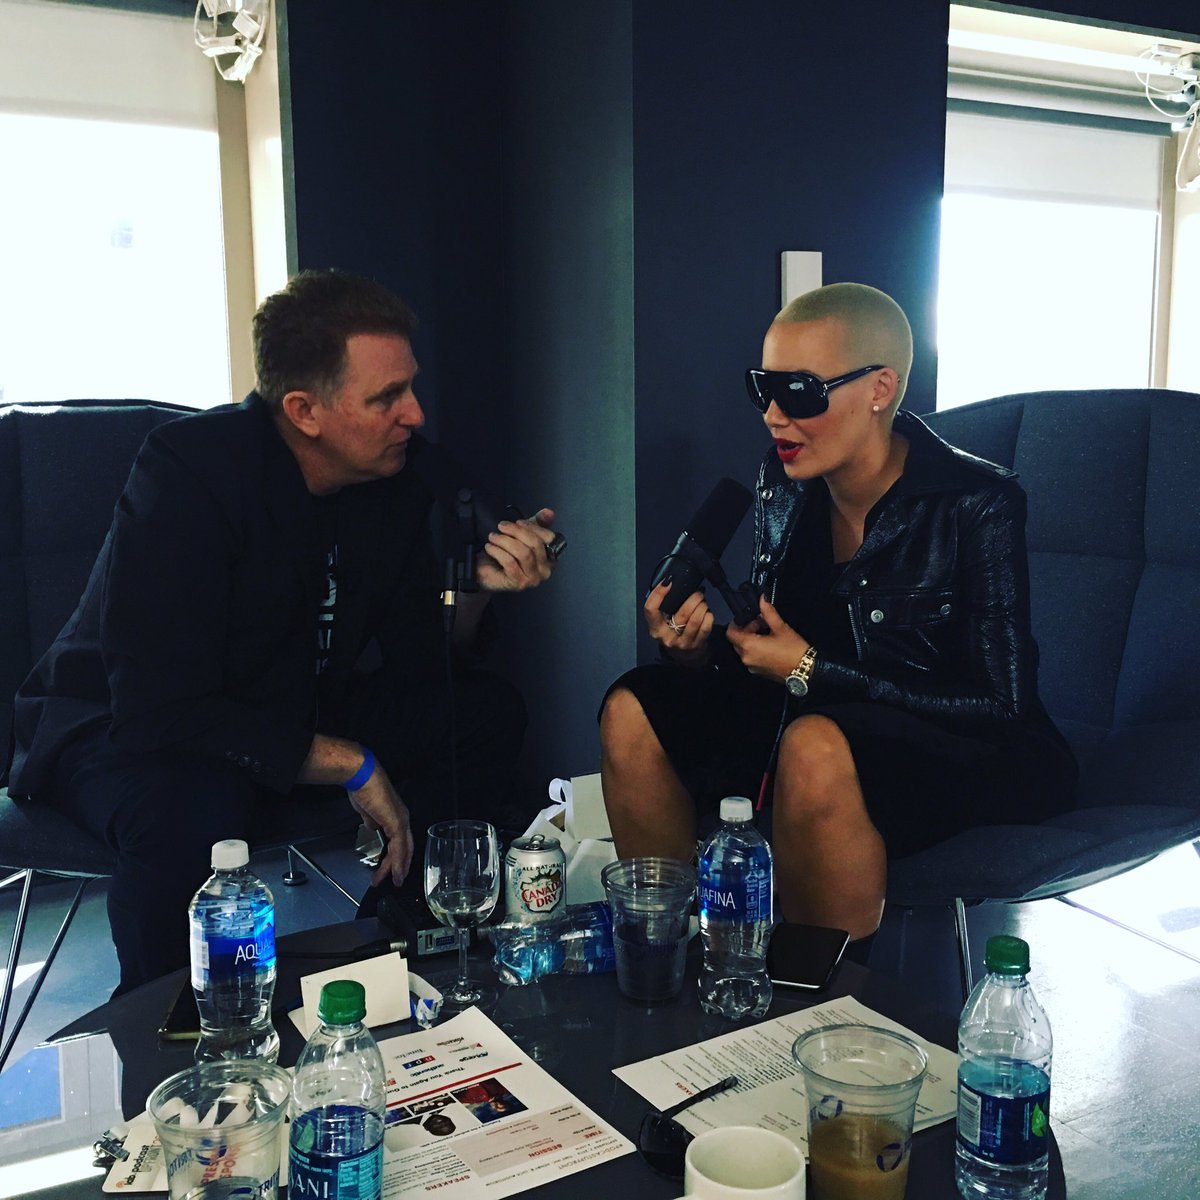 RT @playit: Behind the scenes of #PodcastUpfront, @MichaelRapaport is doing work w/ @DaRealAmberRose for #iamrapaport! https://t.co/s6TUOW3…